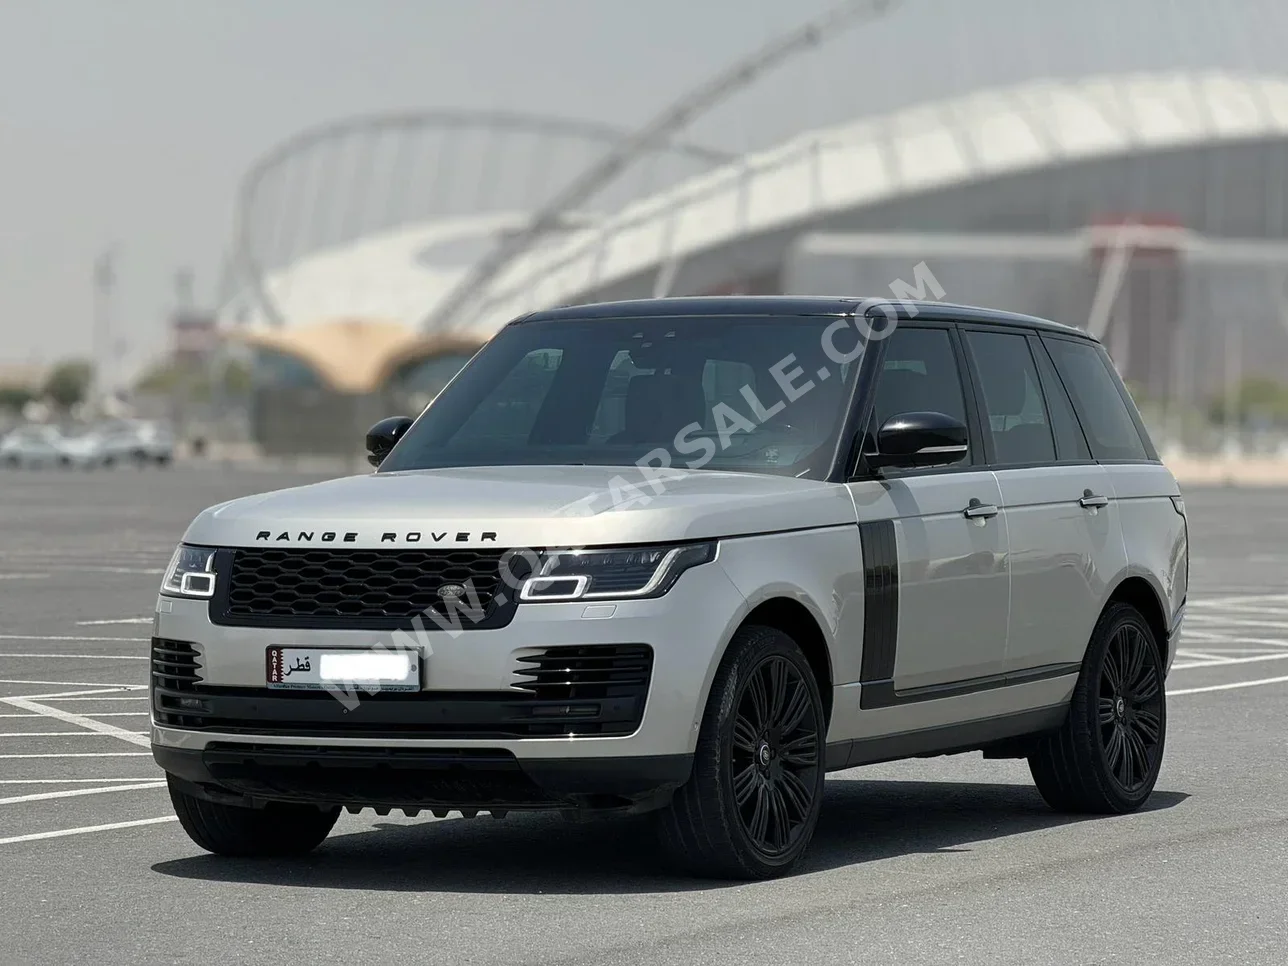 Land Rover  Range Rover  Vogue SE  2018  Automatic  133,000 Km  8 Cylinder  Four Wheel Drive (4WD)  SUV  Silver